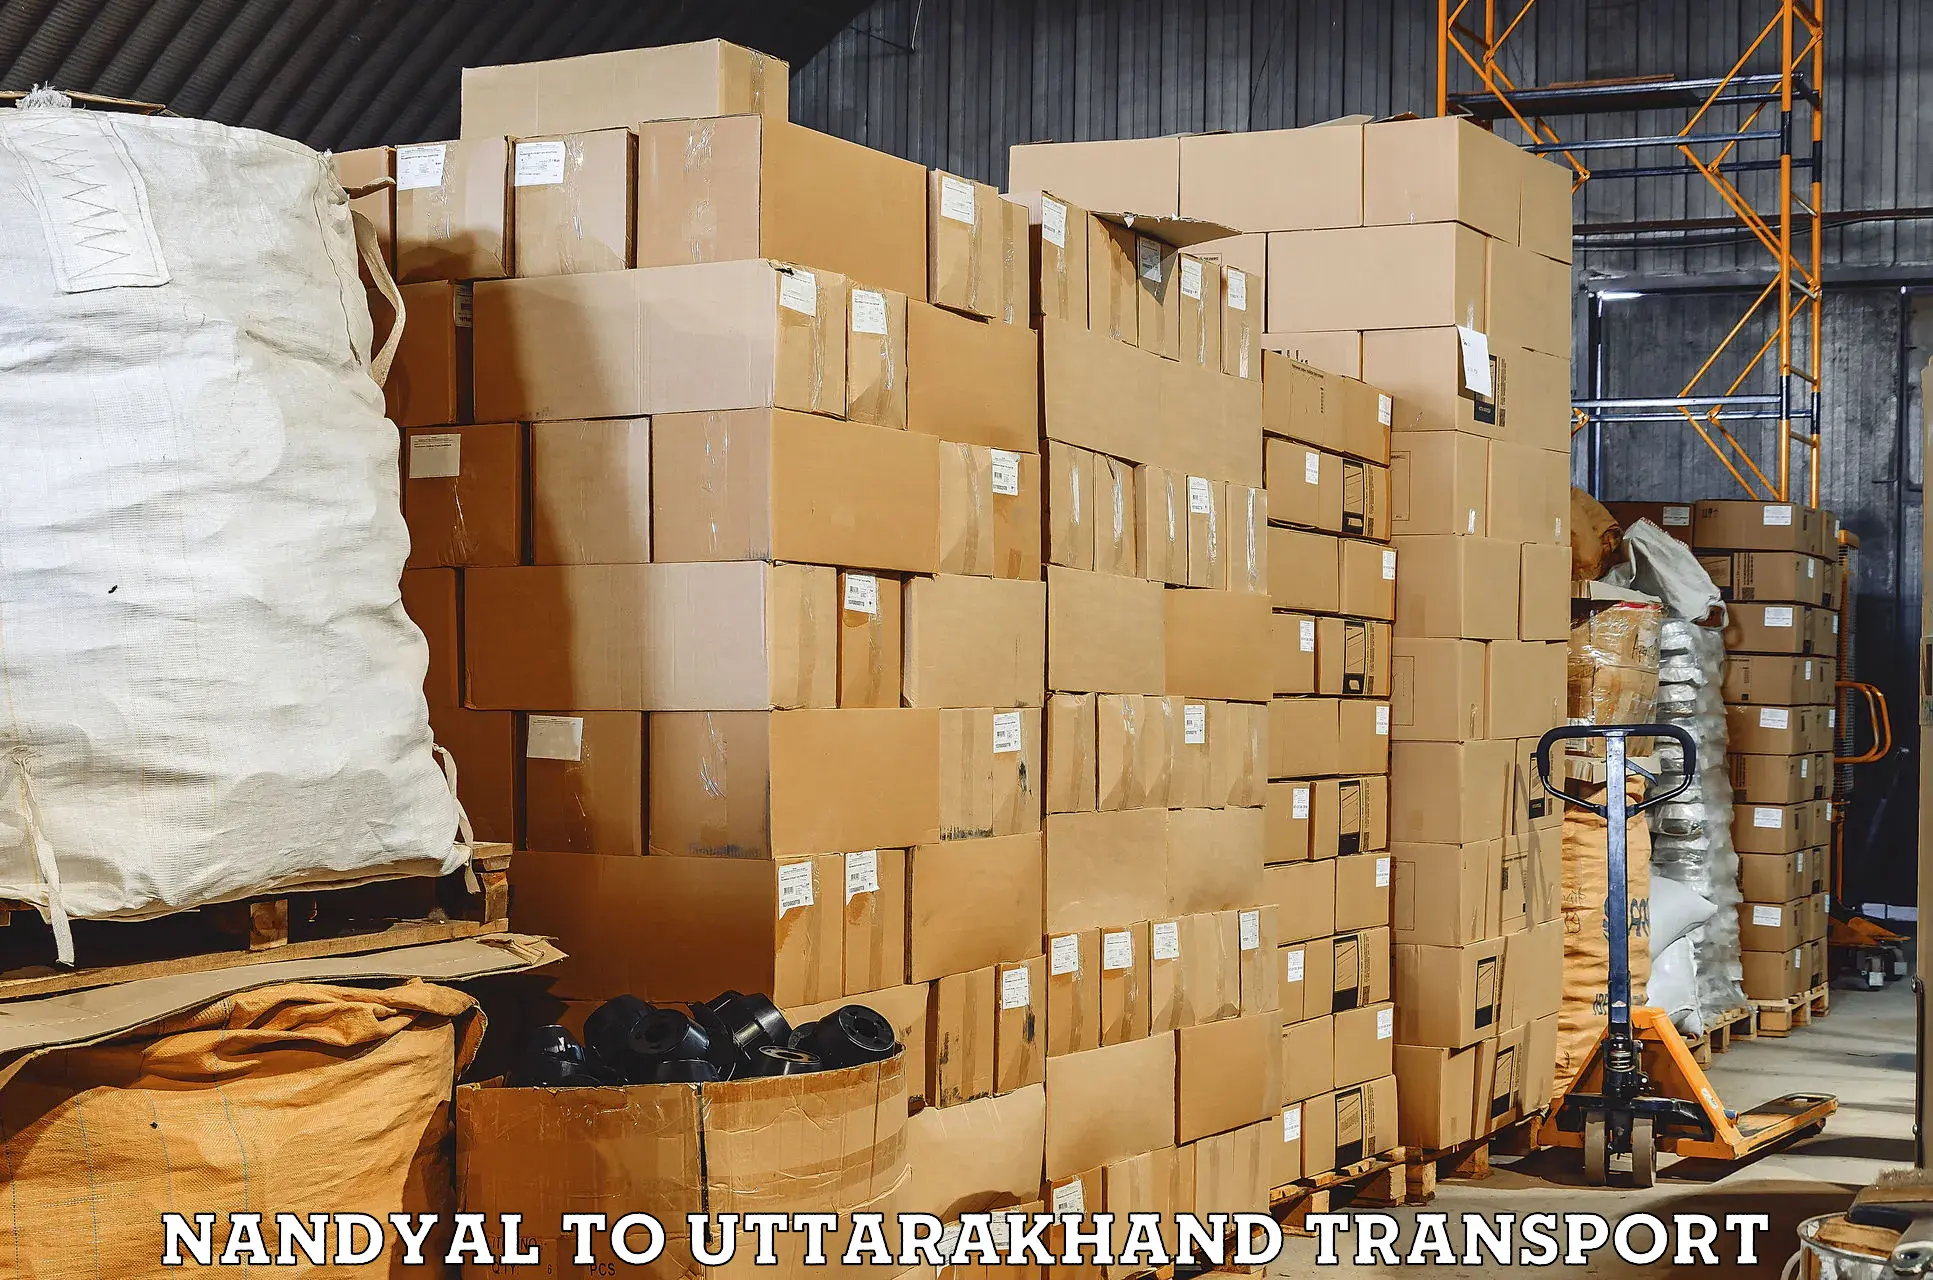 Truck transport companies in India Nandyal to Bhagwanpur